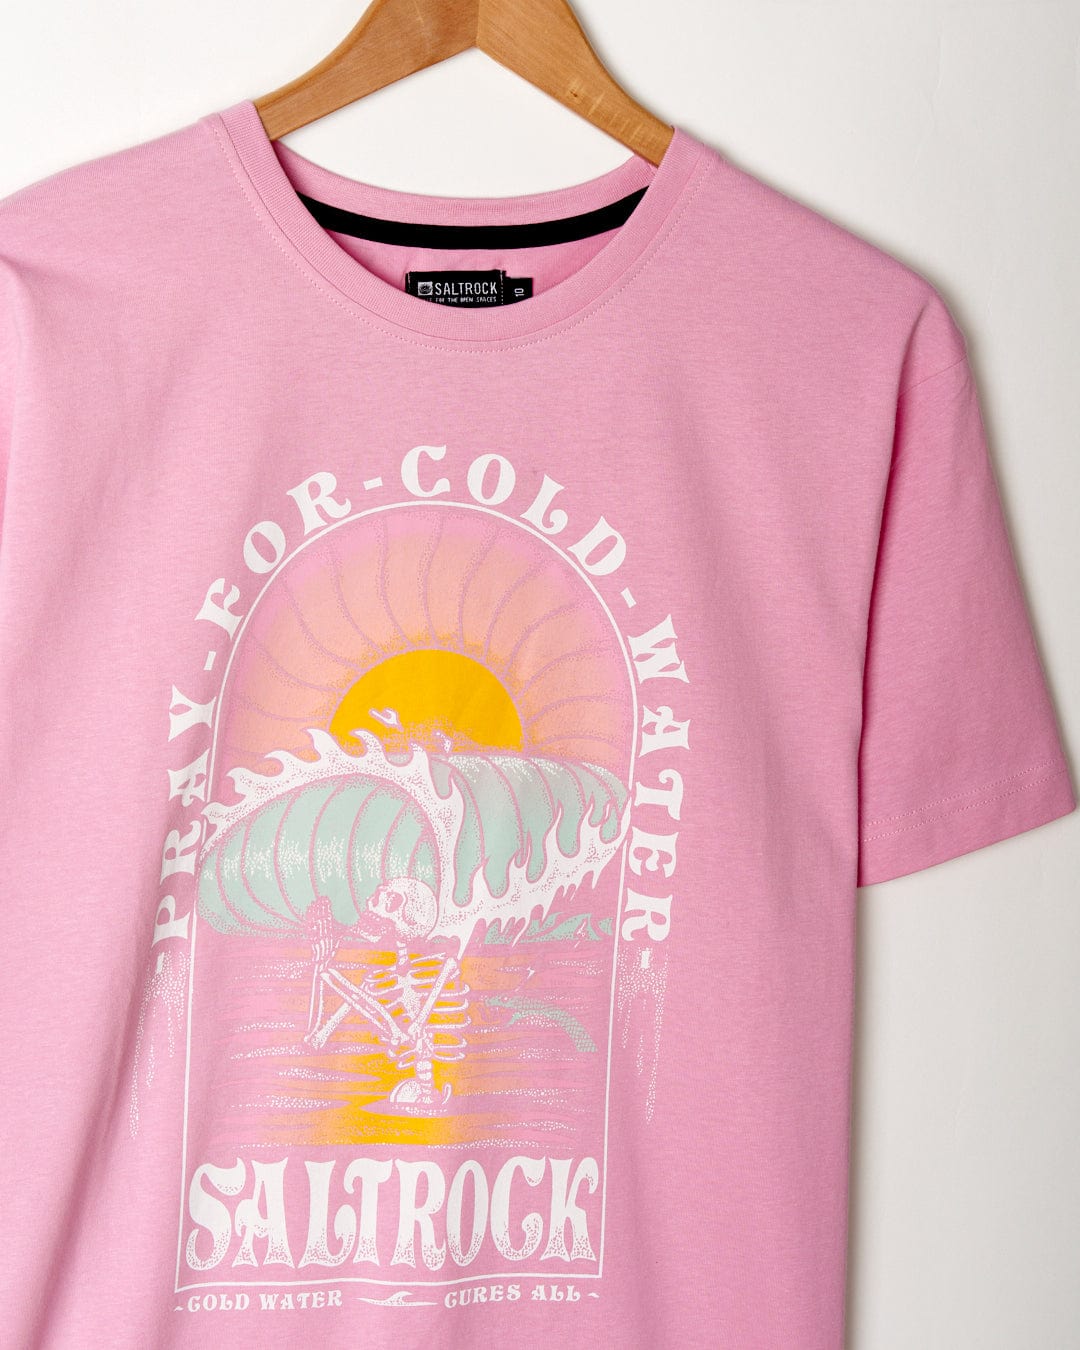 A pink cotton t-shirt with the words "Saltrock" on it.